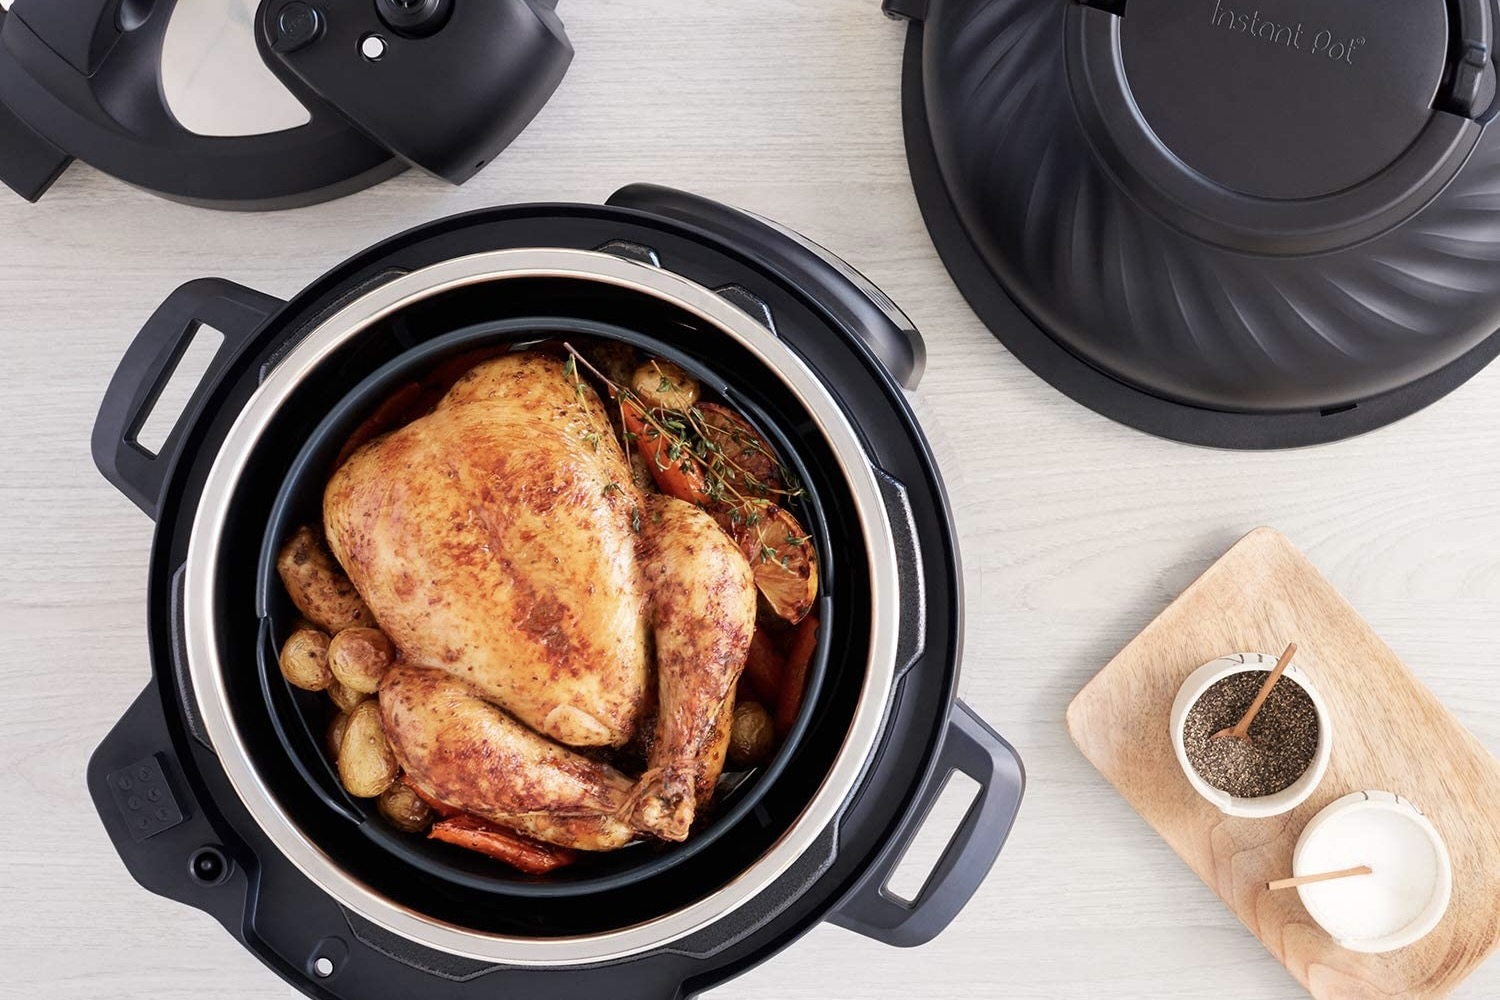 Which Is the Best Instant Pot for You?